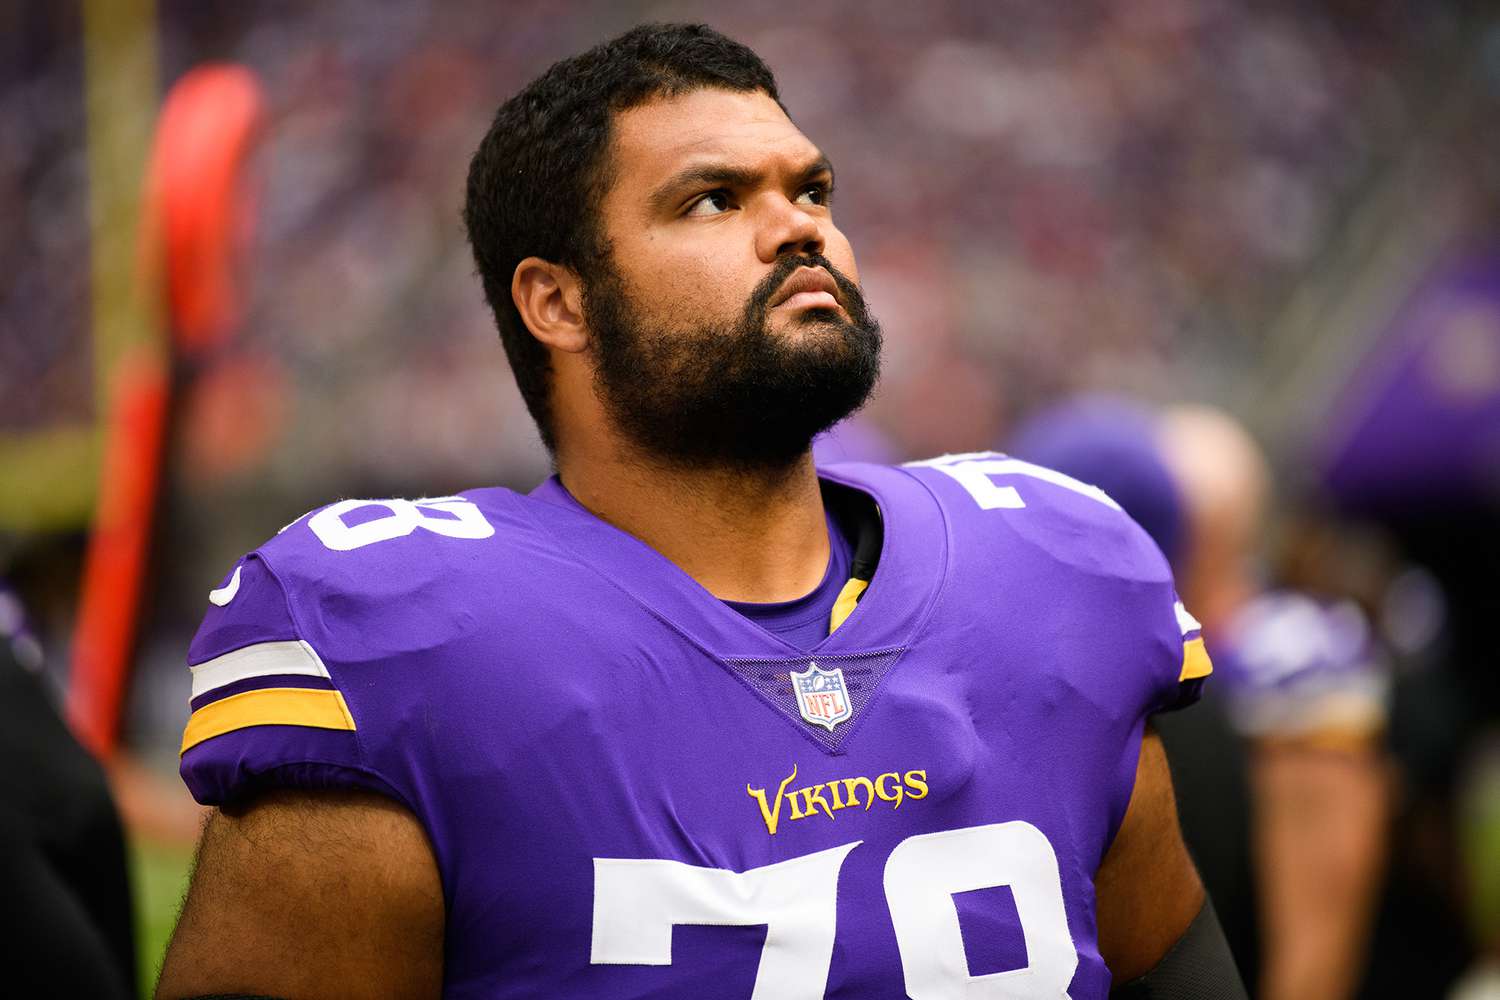 Breaking News: Just Now Minnesota Vikings defensive lineman dead at 27 after cancer battle: ‘A great teammate’…